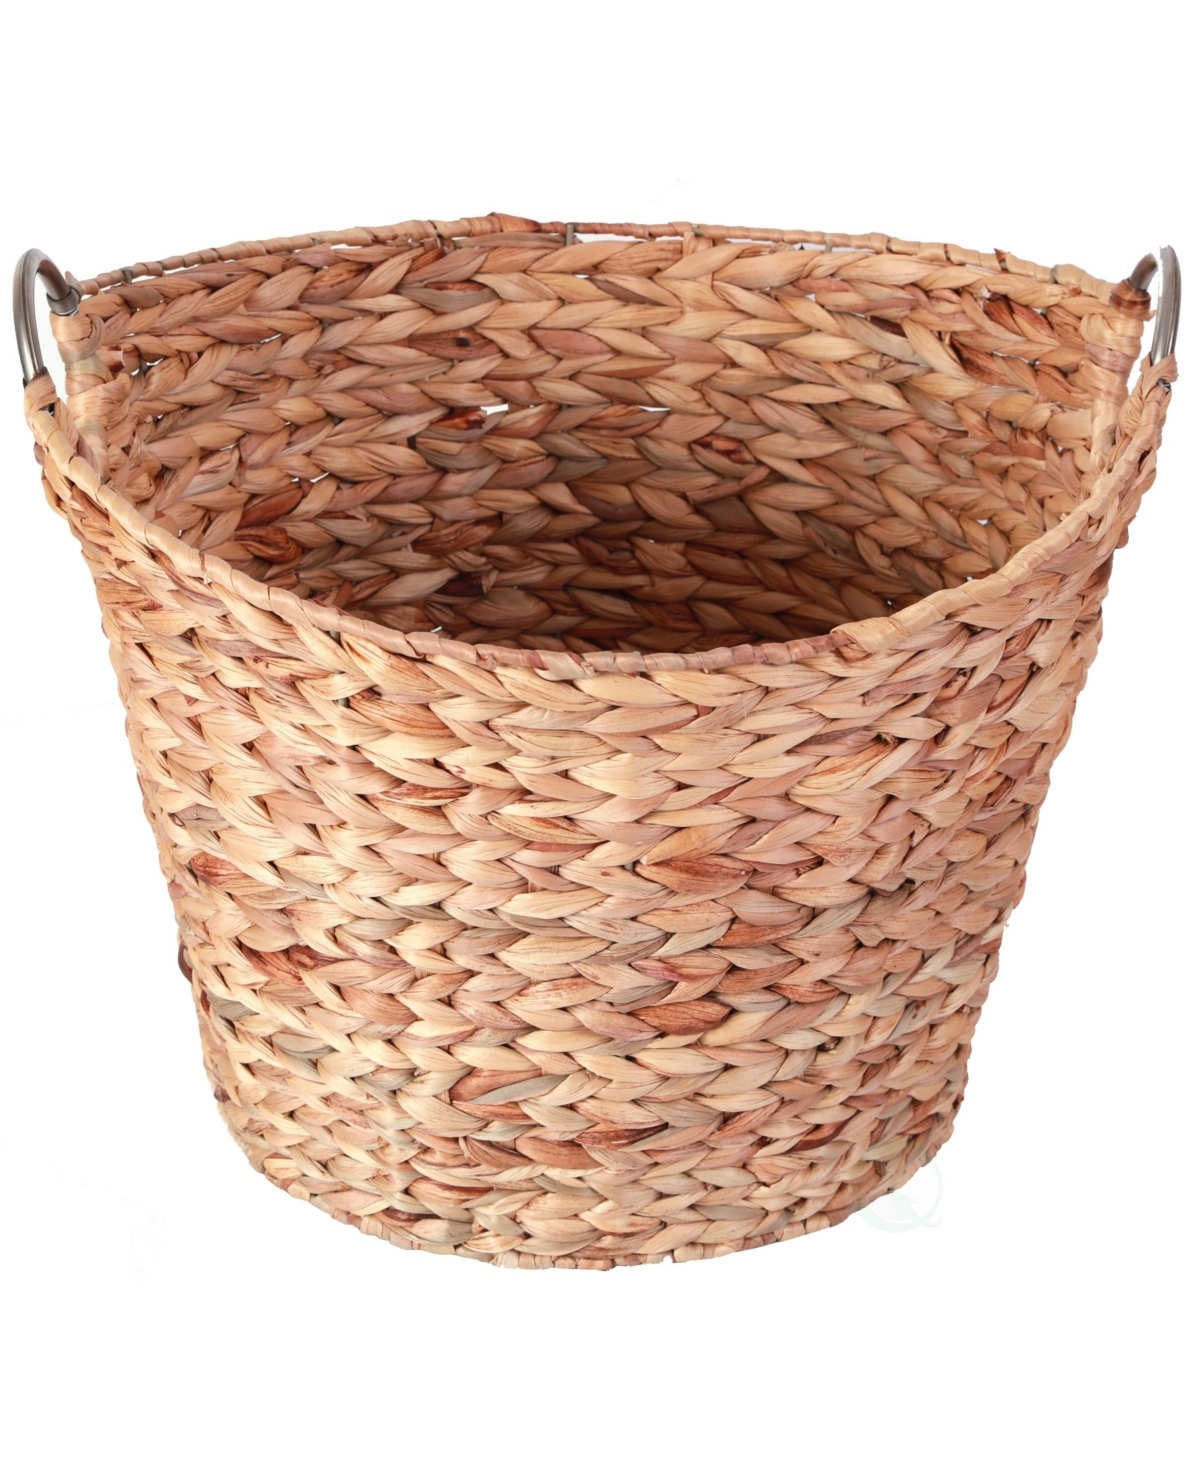 Water Hyacinth Wicker Large Round Storage Laundry Basket with Handles - Natural